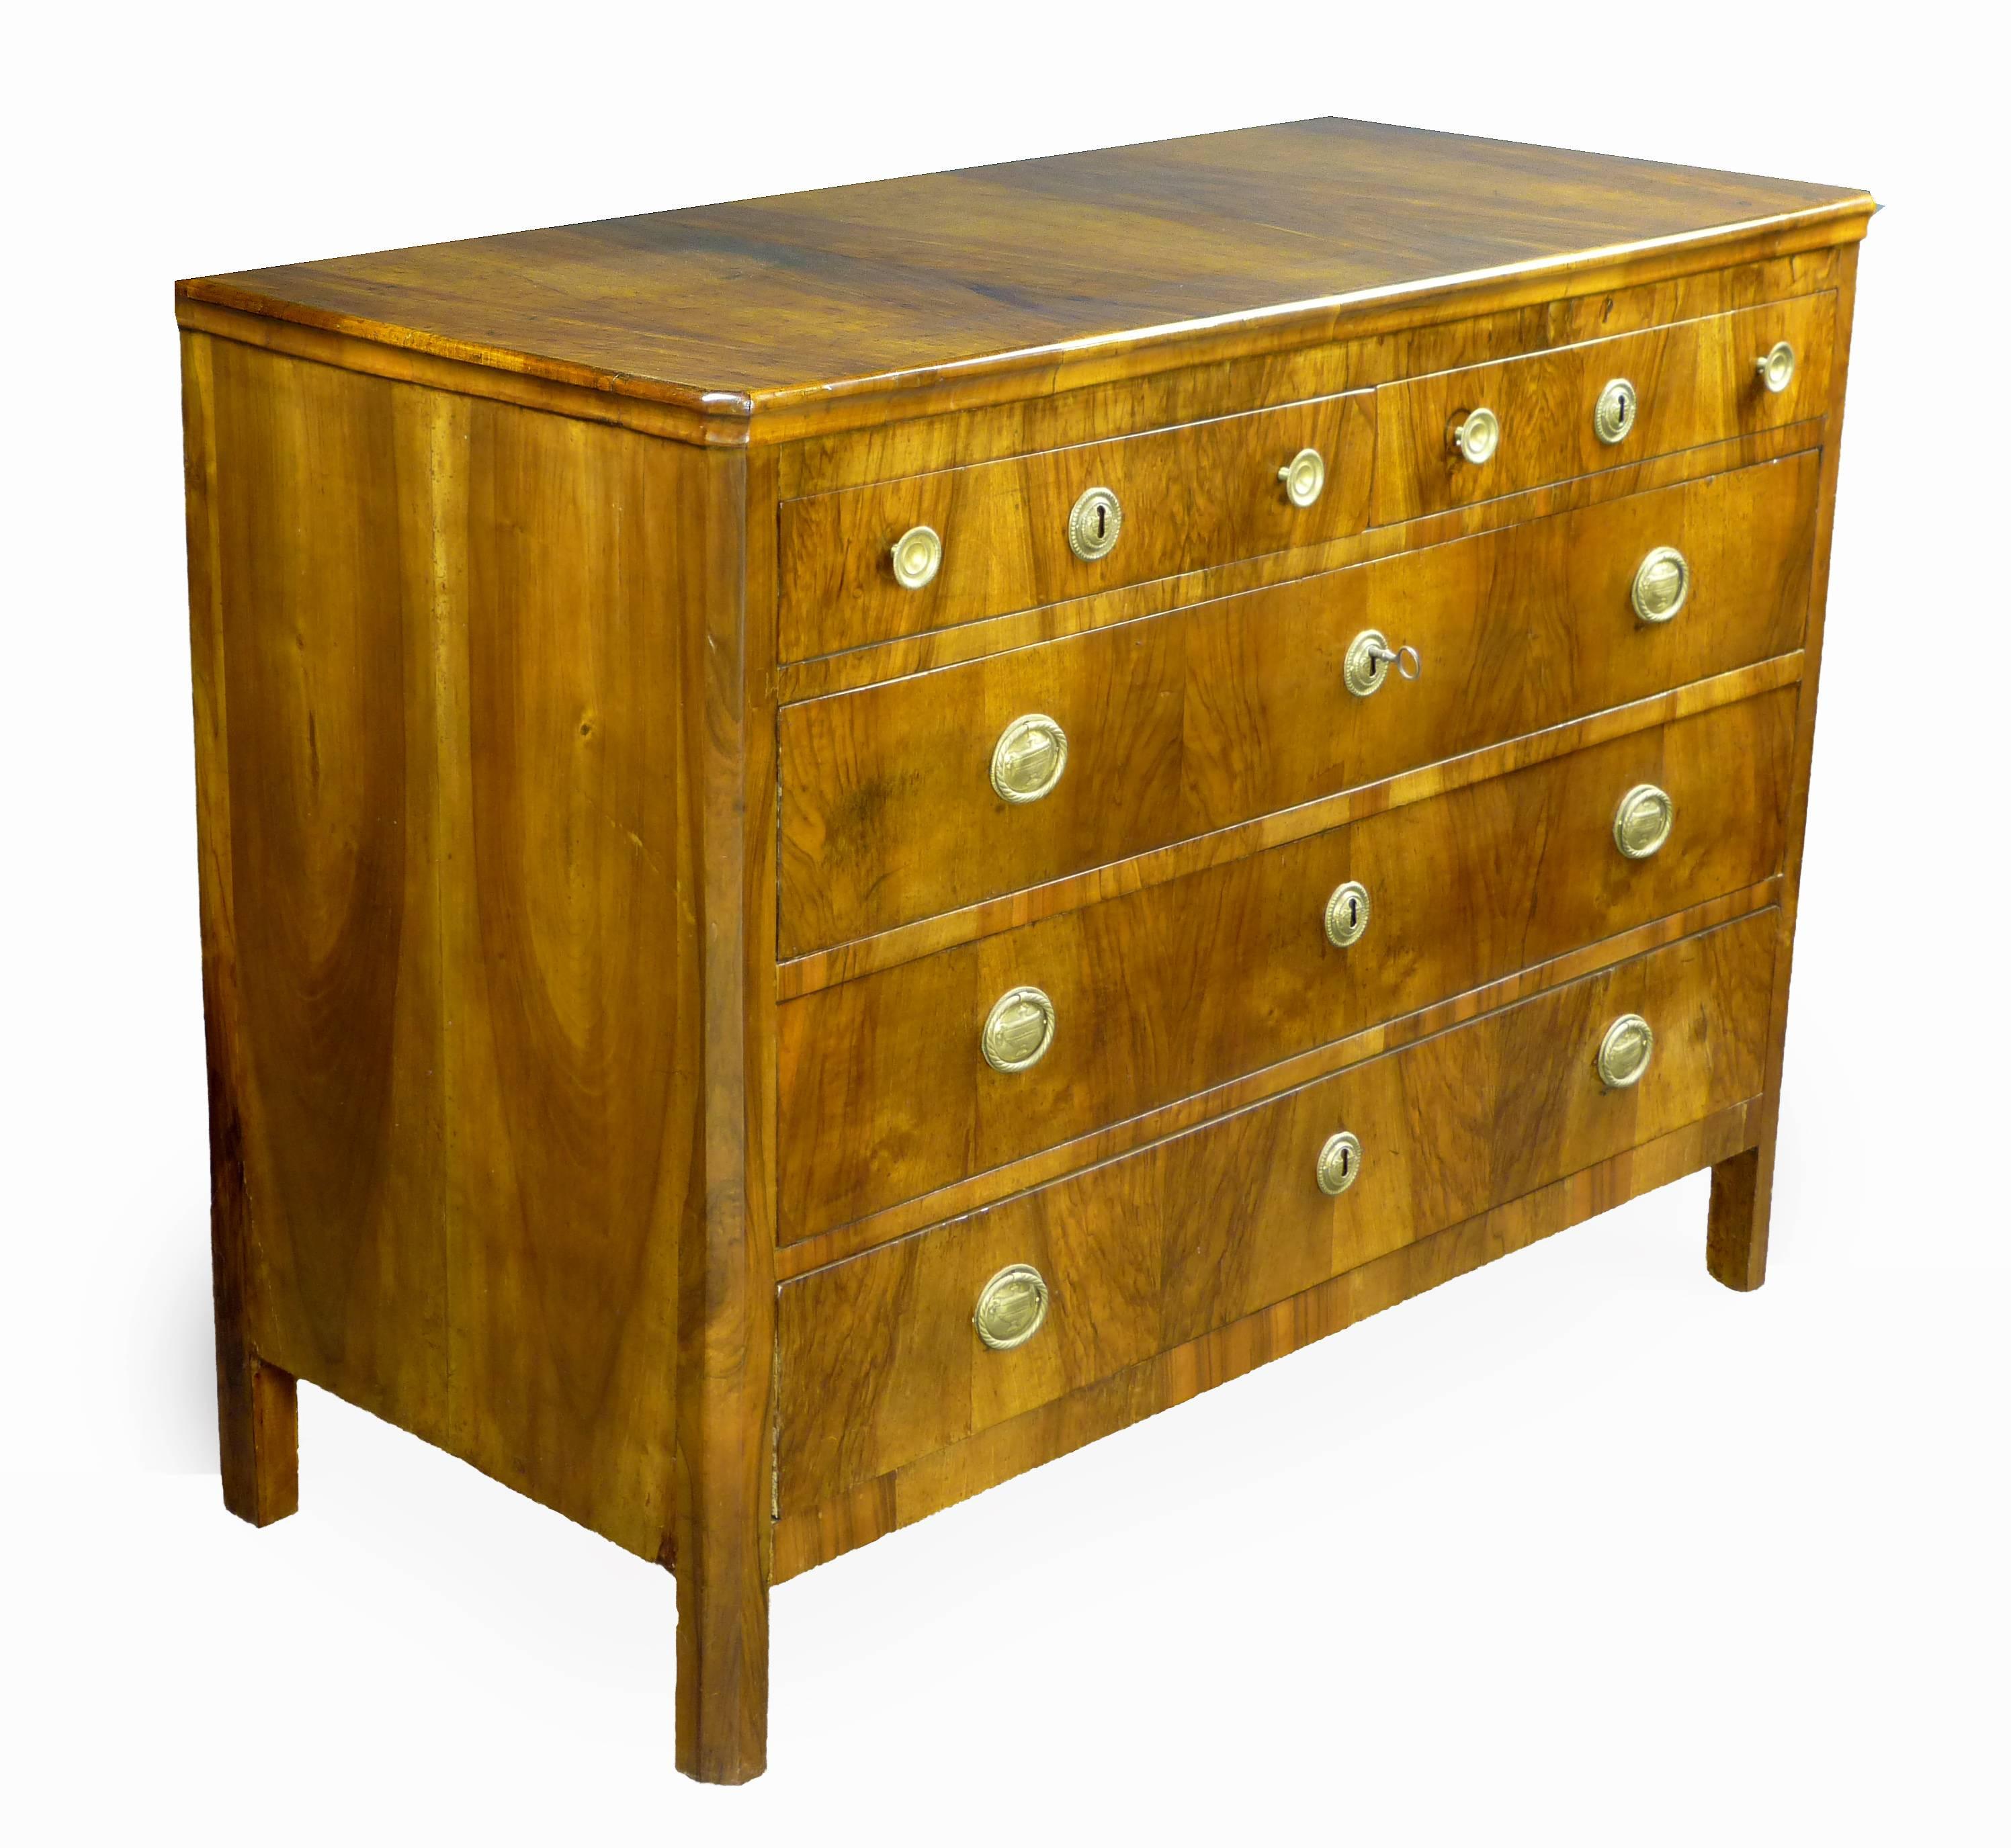 Elegant Biedermeier Viennese commode of fine book-matched walnut veneers on all three sides, slightly canted corners, moulded top on small block feet. Two small over three large drawers with original brass pulls and escutcheons. Original condition,